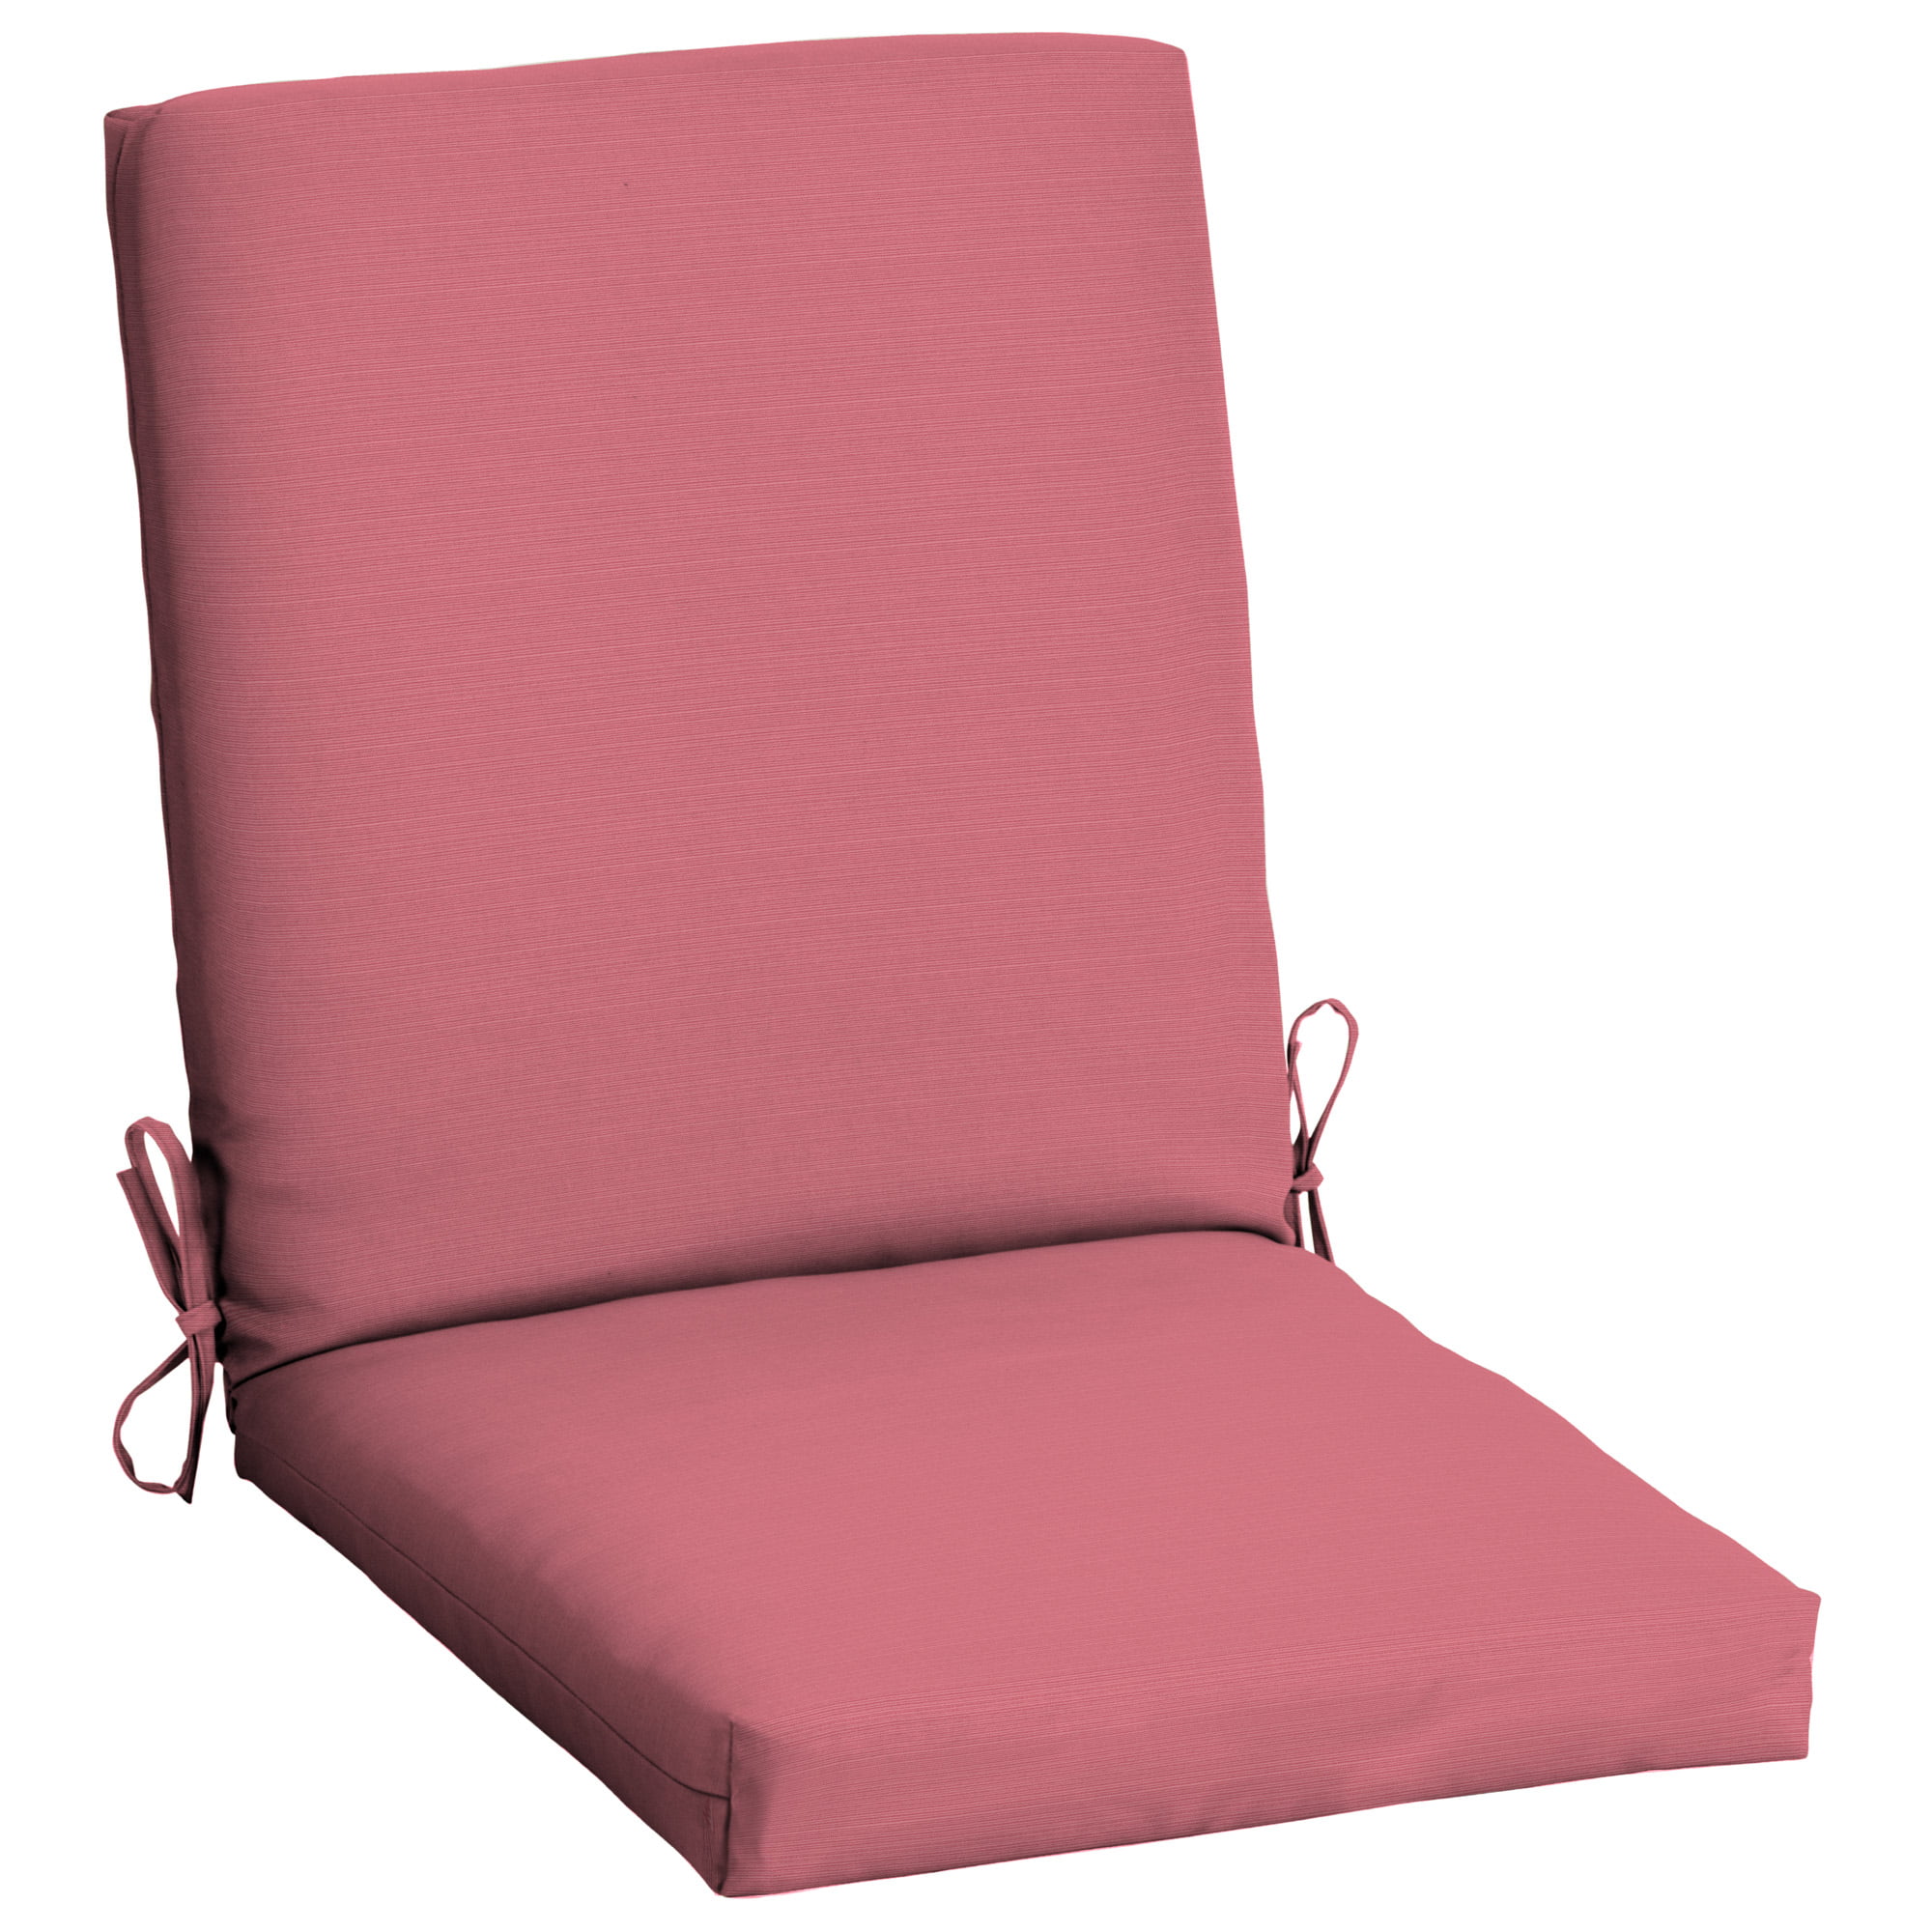 In/Outdoor Tufted Seat Cushion w/Ties for Bench/Swing 48" x 20" Solid Pink 